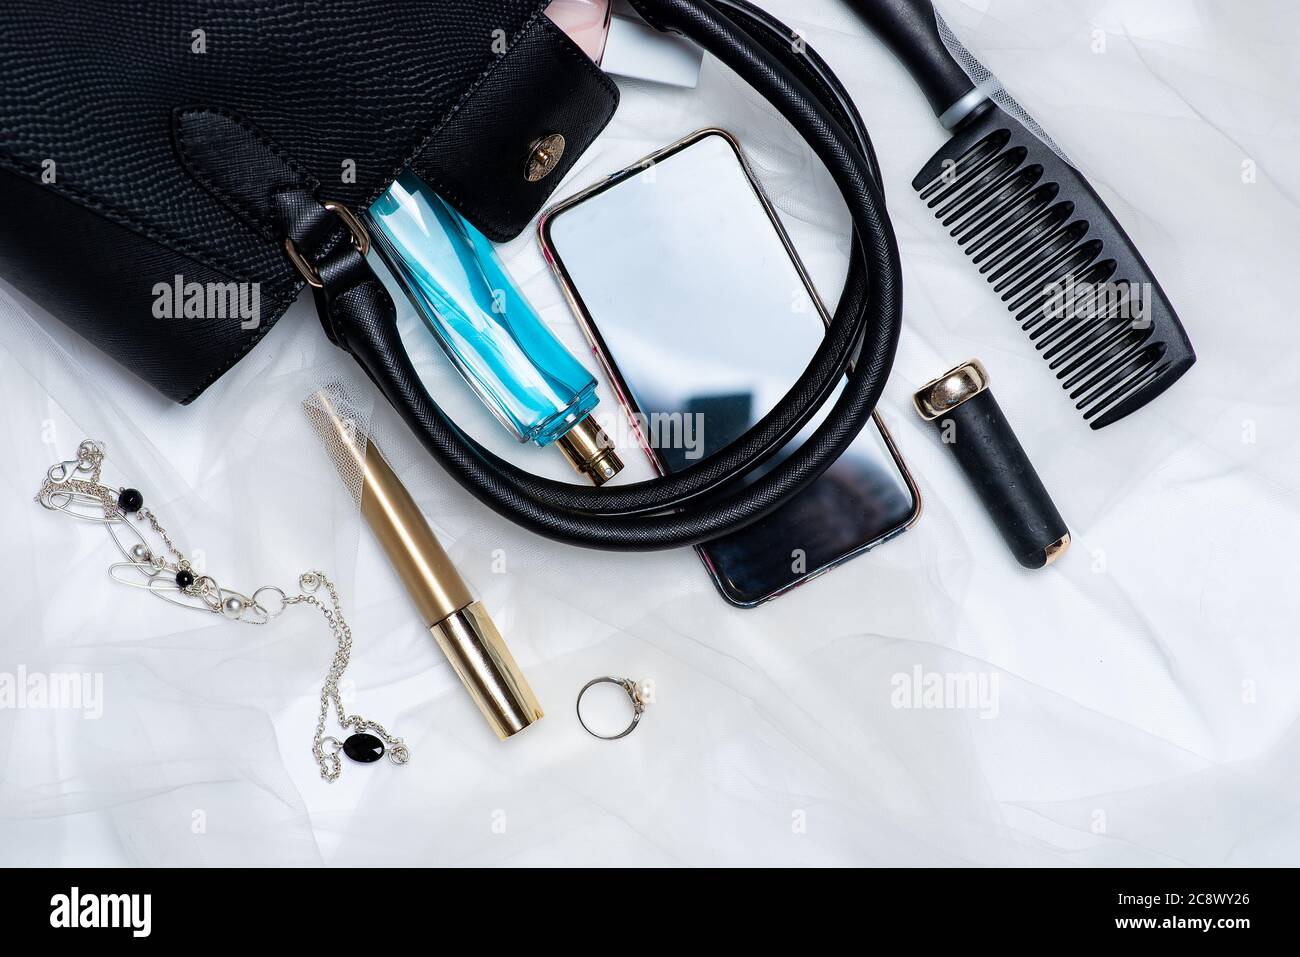 Various makeup and cosmetic products falling out of an female bag tabletop flat lay with copy space Stock Photo